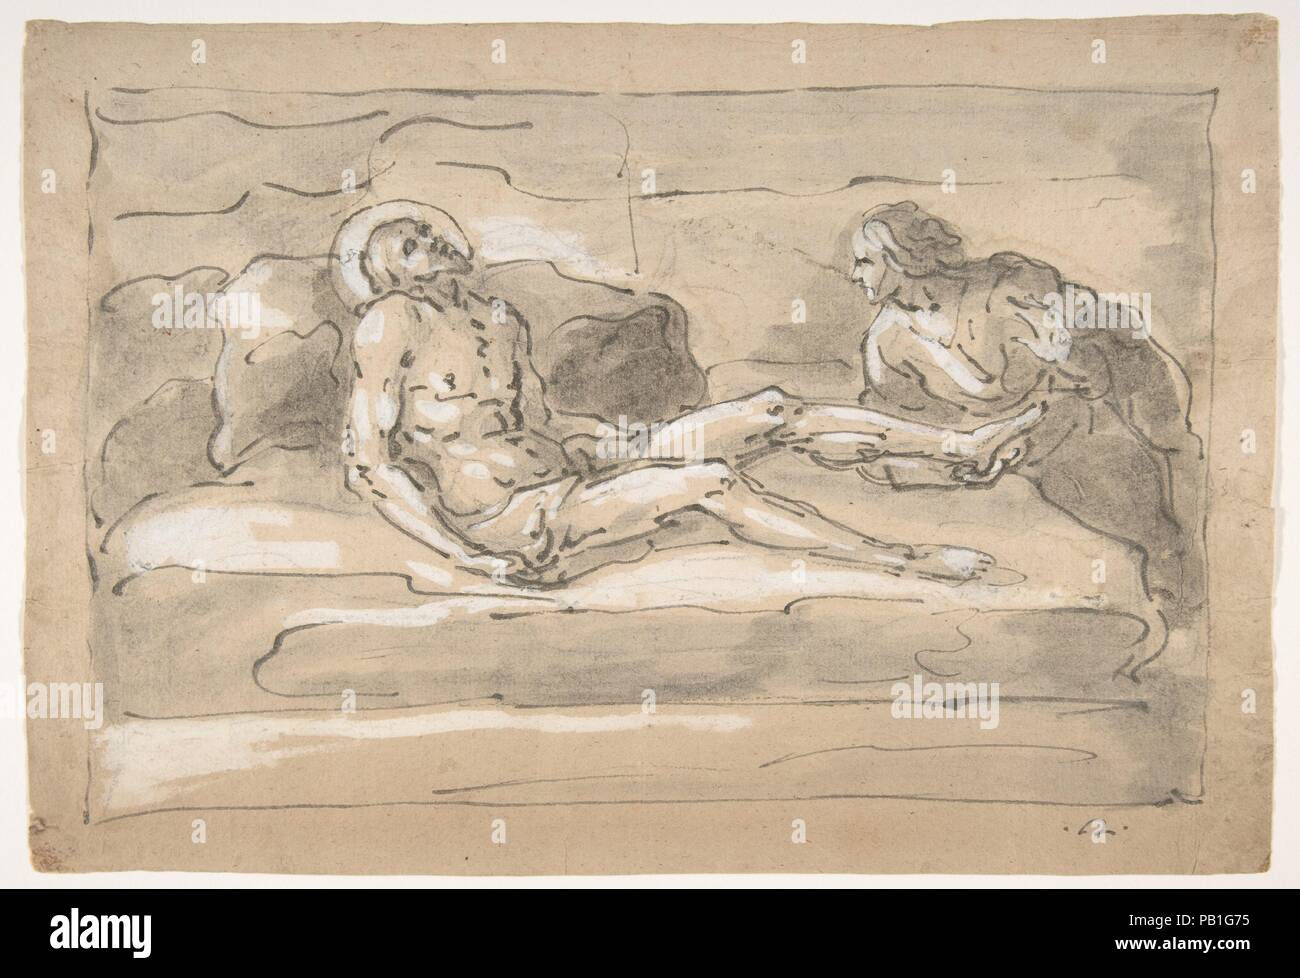 The Dead Christ Mourned by the Magdalen Who Venerates the Wounds on His Feet. Artist: Fortunato Duranti (Italian, 1787-1863). Dimensions: 8 3/4 × 12 1/4 in. (22.2 × 31.1 cm). Date: 1787-1863. Museum: Metropolitan Museum of Art, New York, USA. Stock Photo